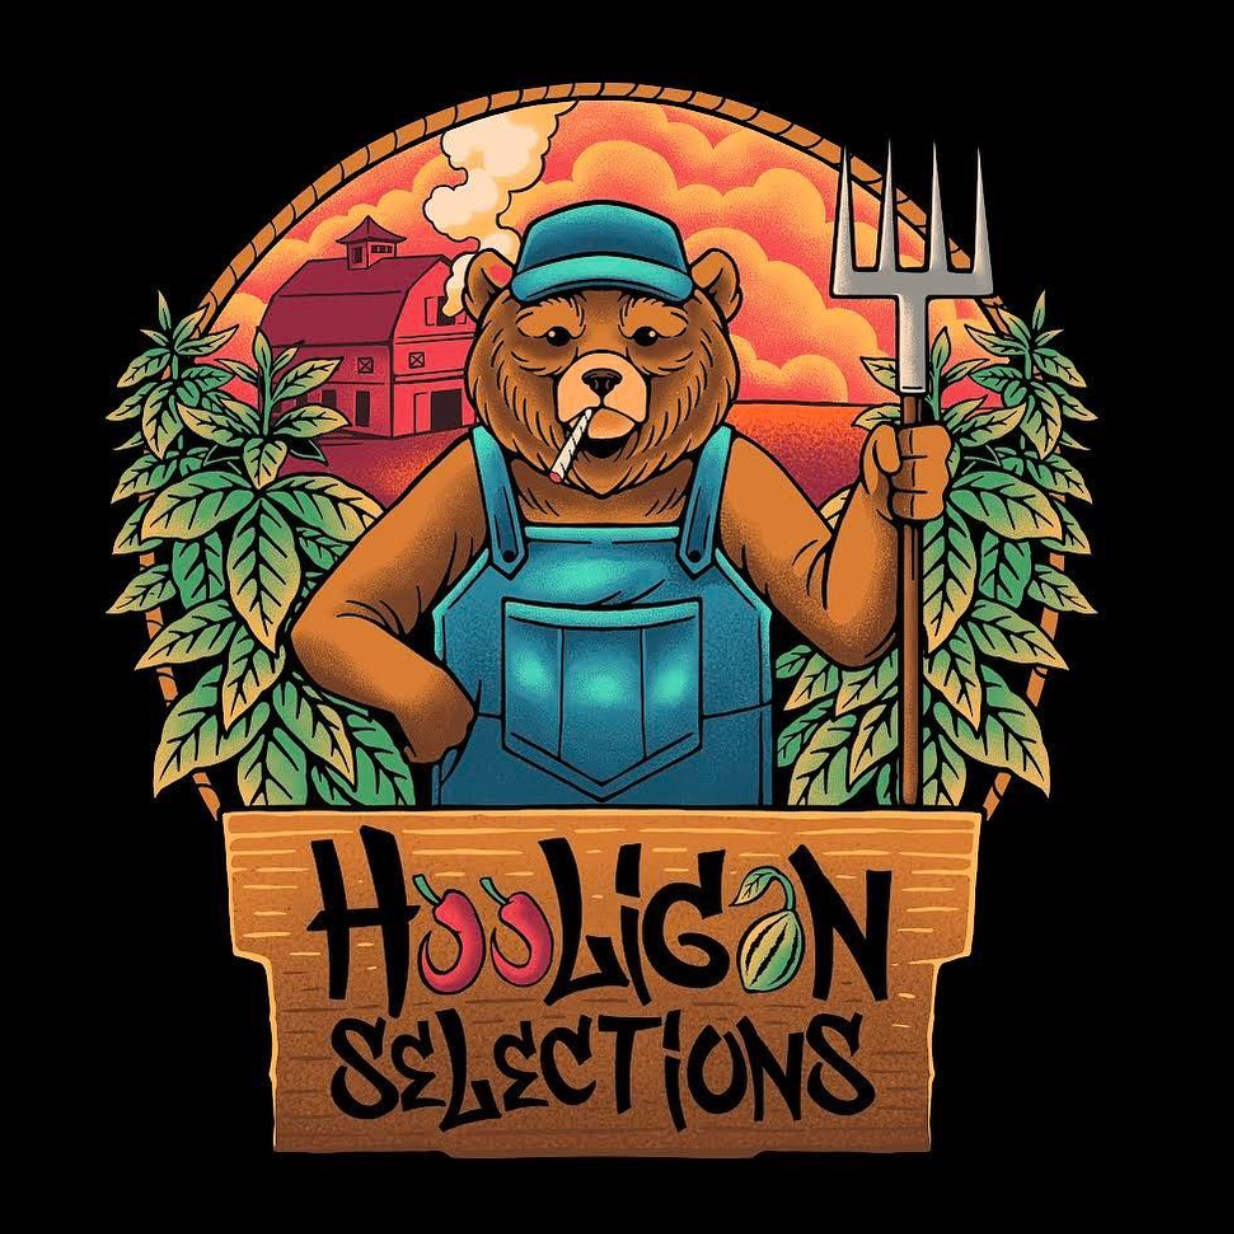 Hooligan Selections - Chile HP